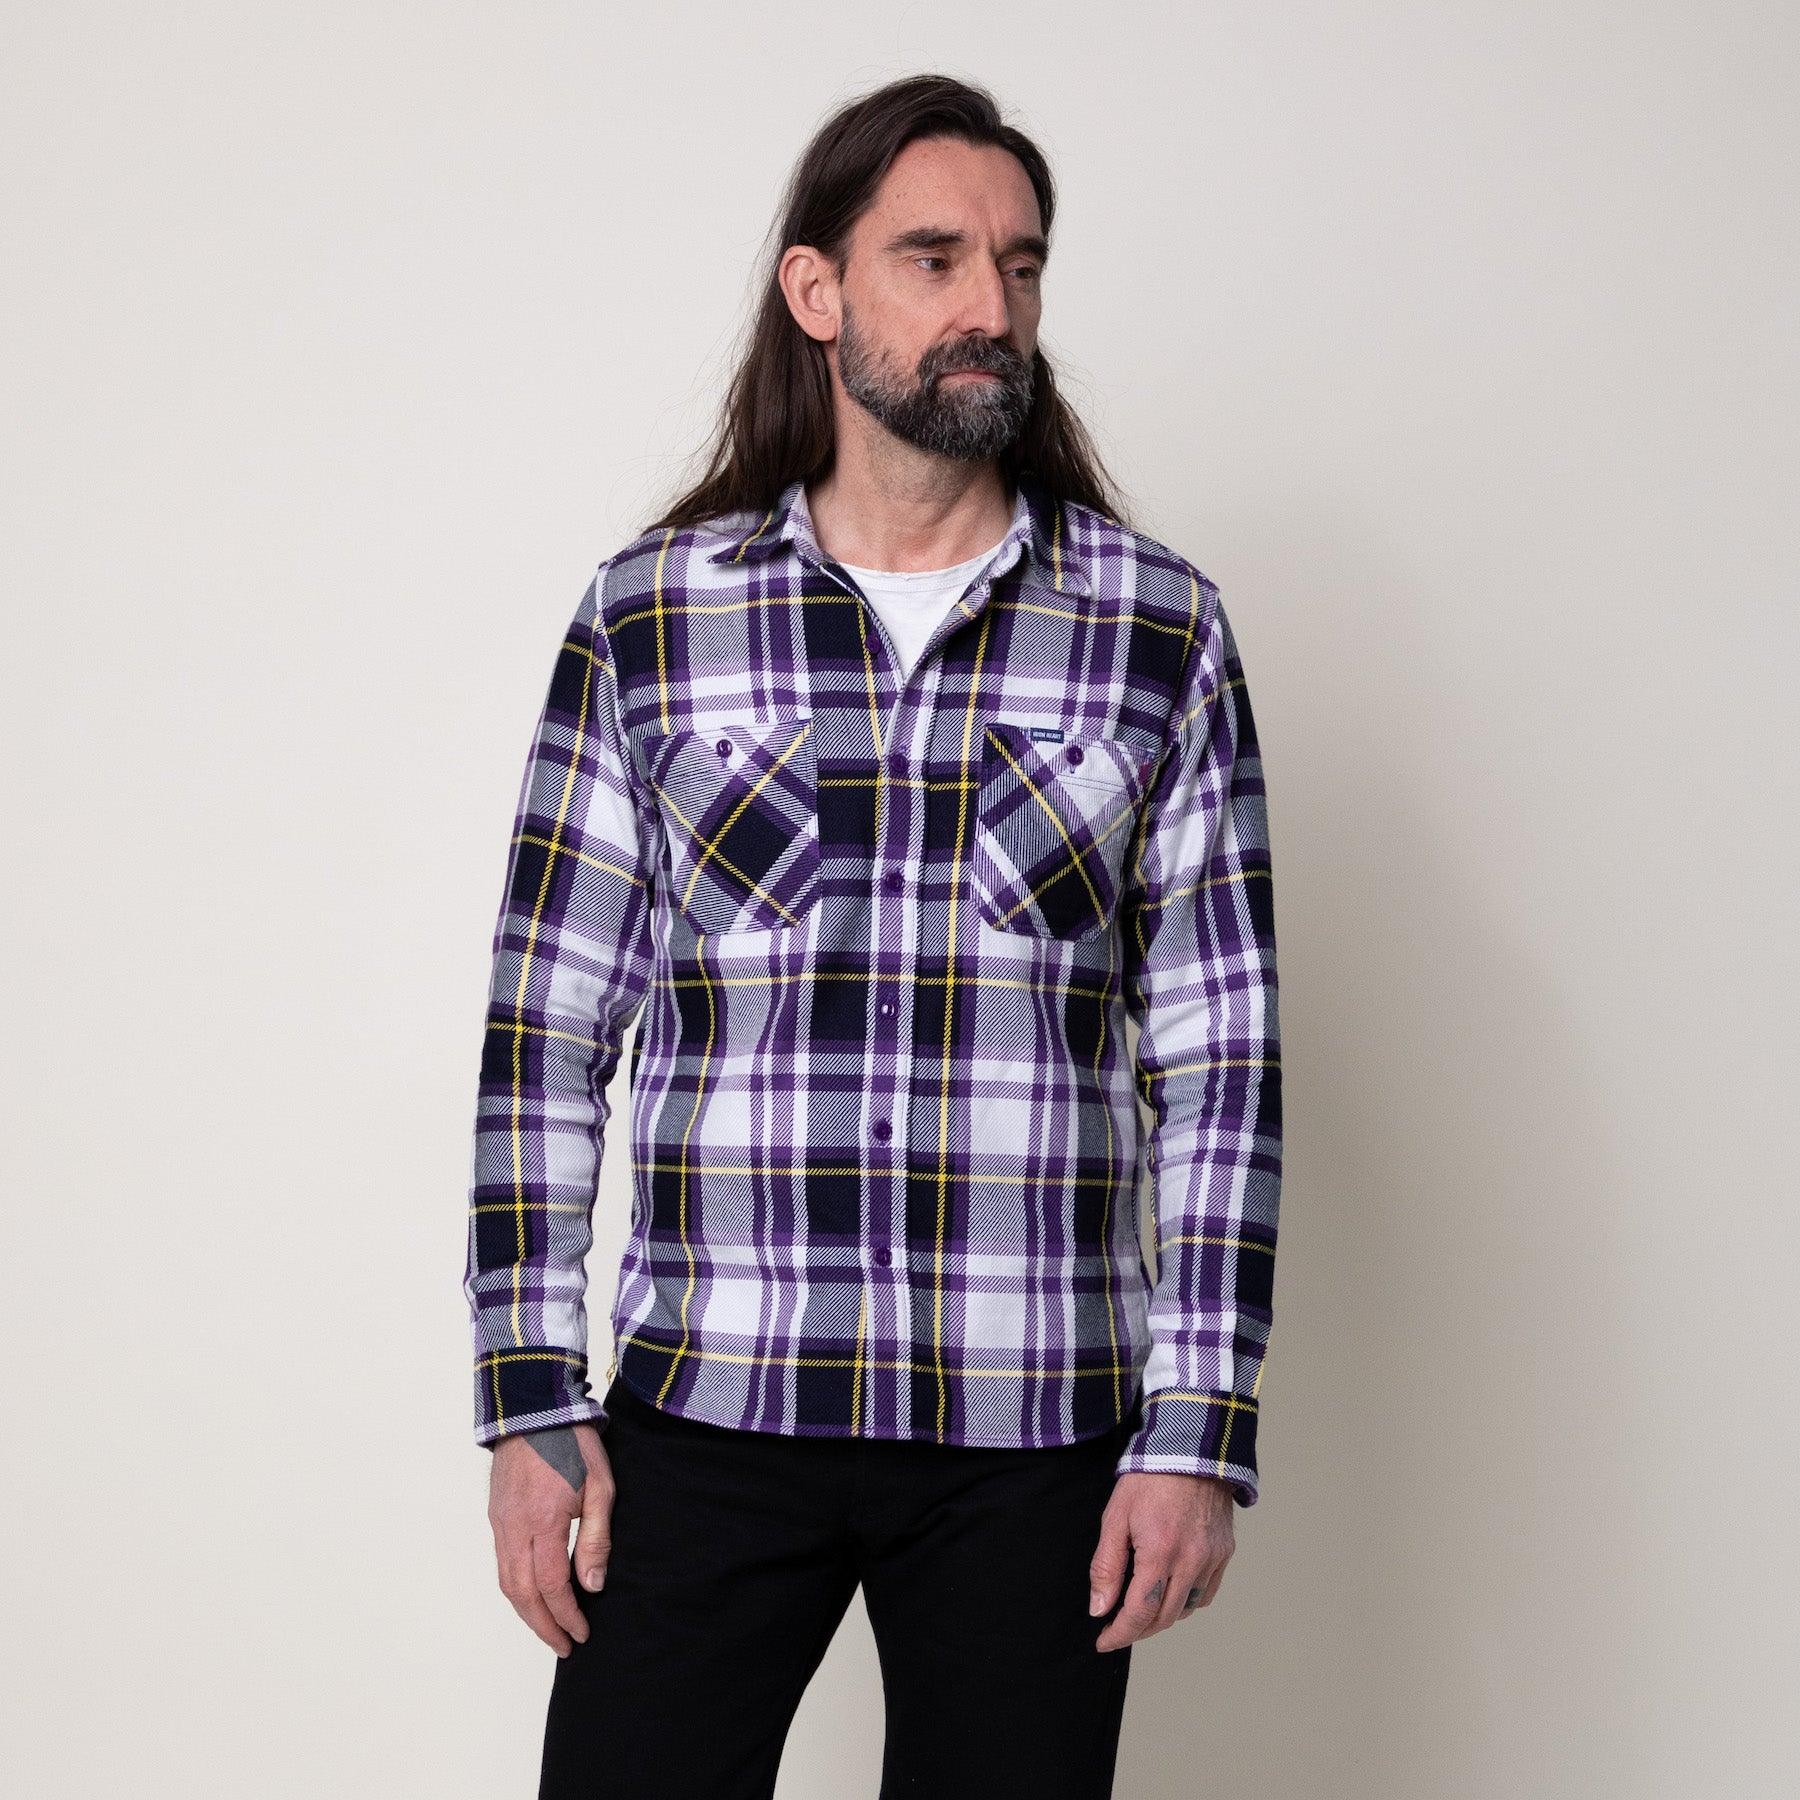 Image showing the IHSH-382-PUR - 9oz Selvedge American Check Work Shirt - Purple which is a Shirts described by the following info SS24 and sold on the IRON HEART GERMANY online store